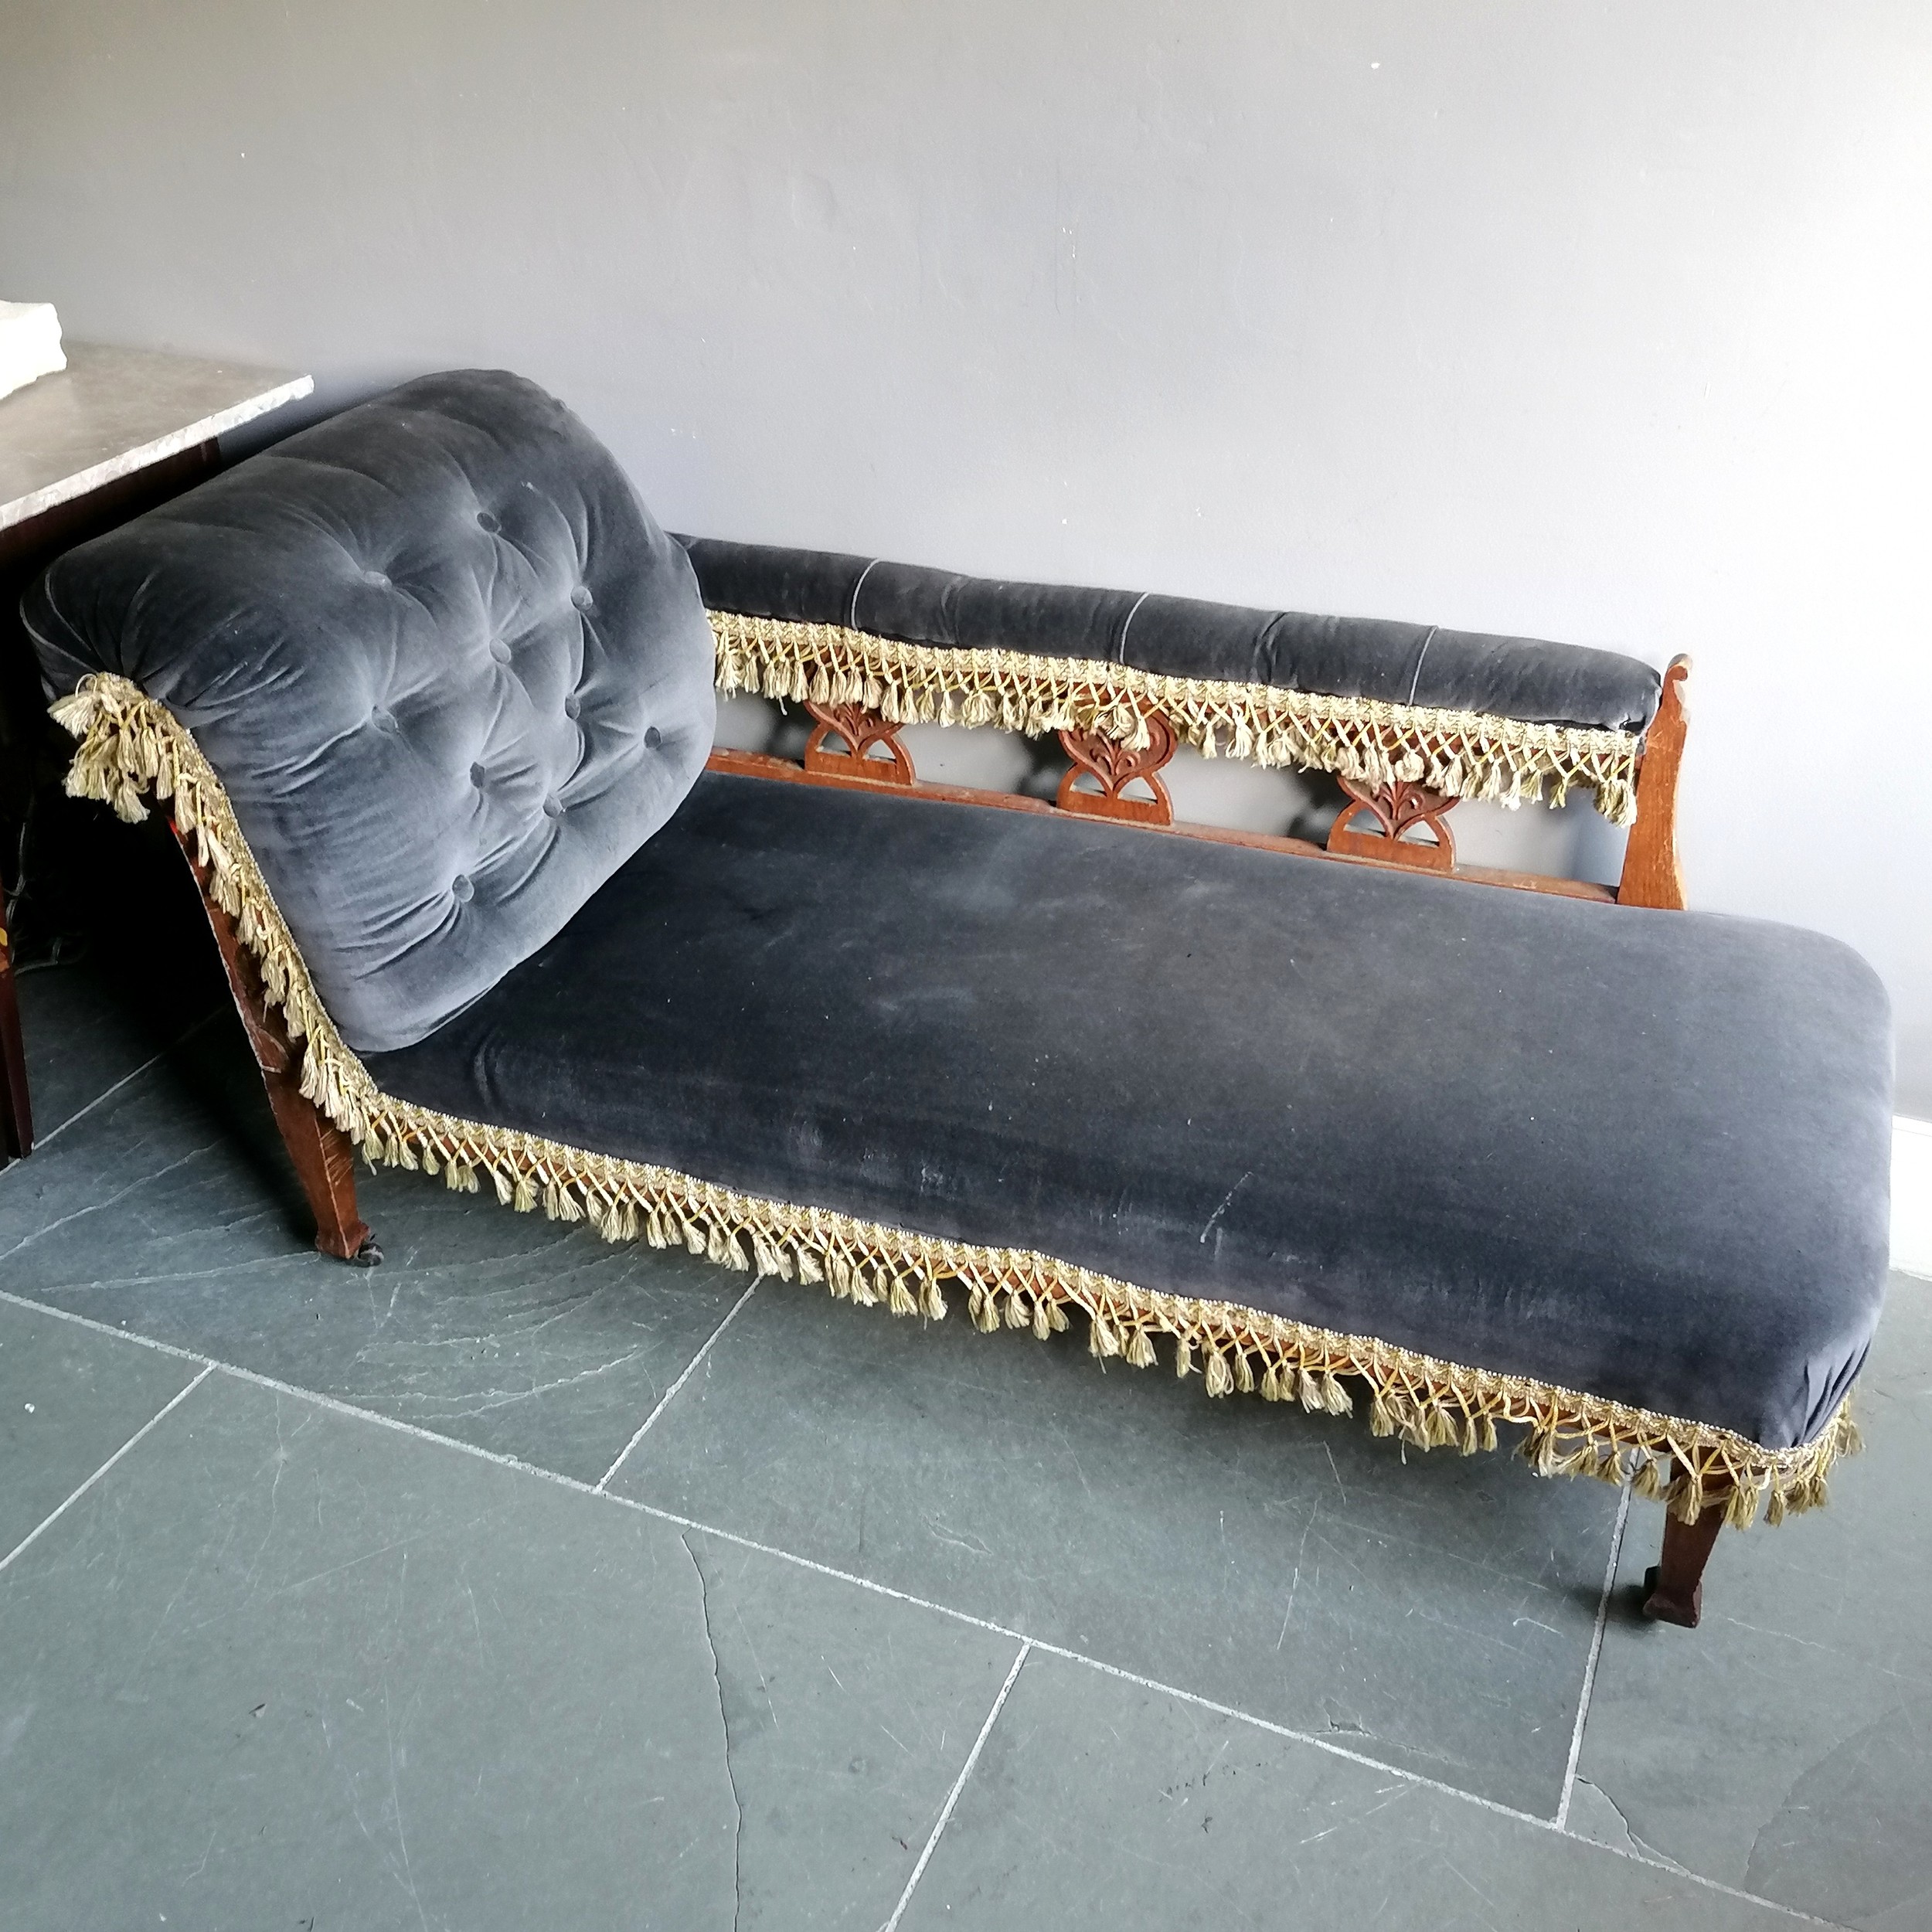 Antique oak framed chaise longue upholstered in grey 84cm high x 170cm long x 67cm deep - Image 2 of 3